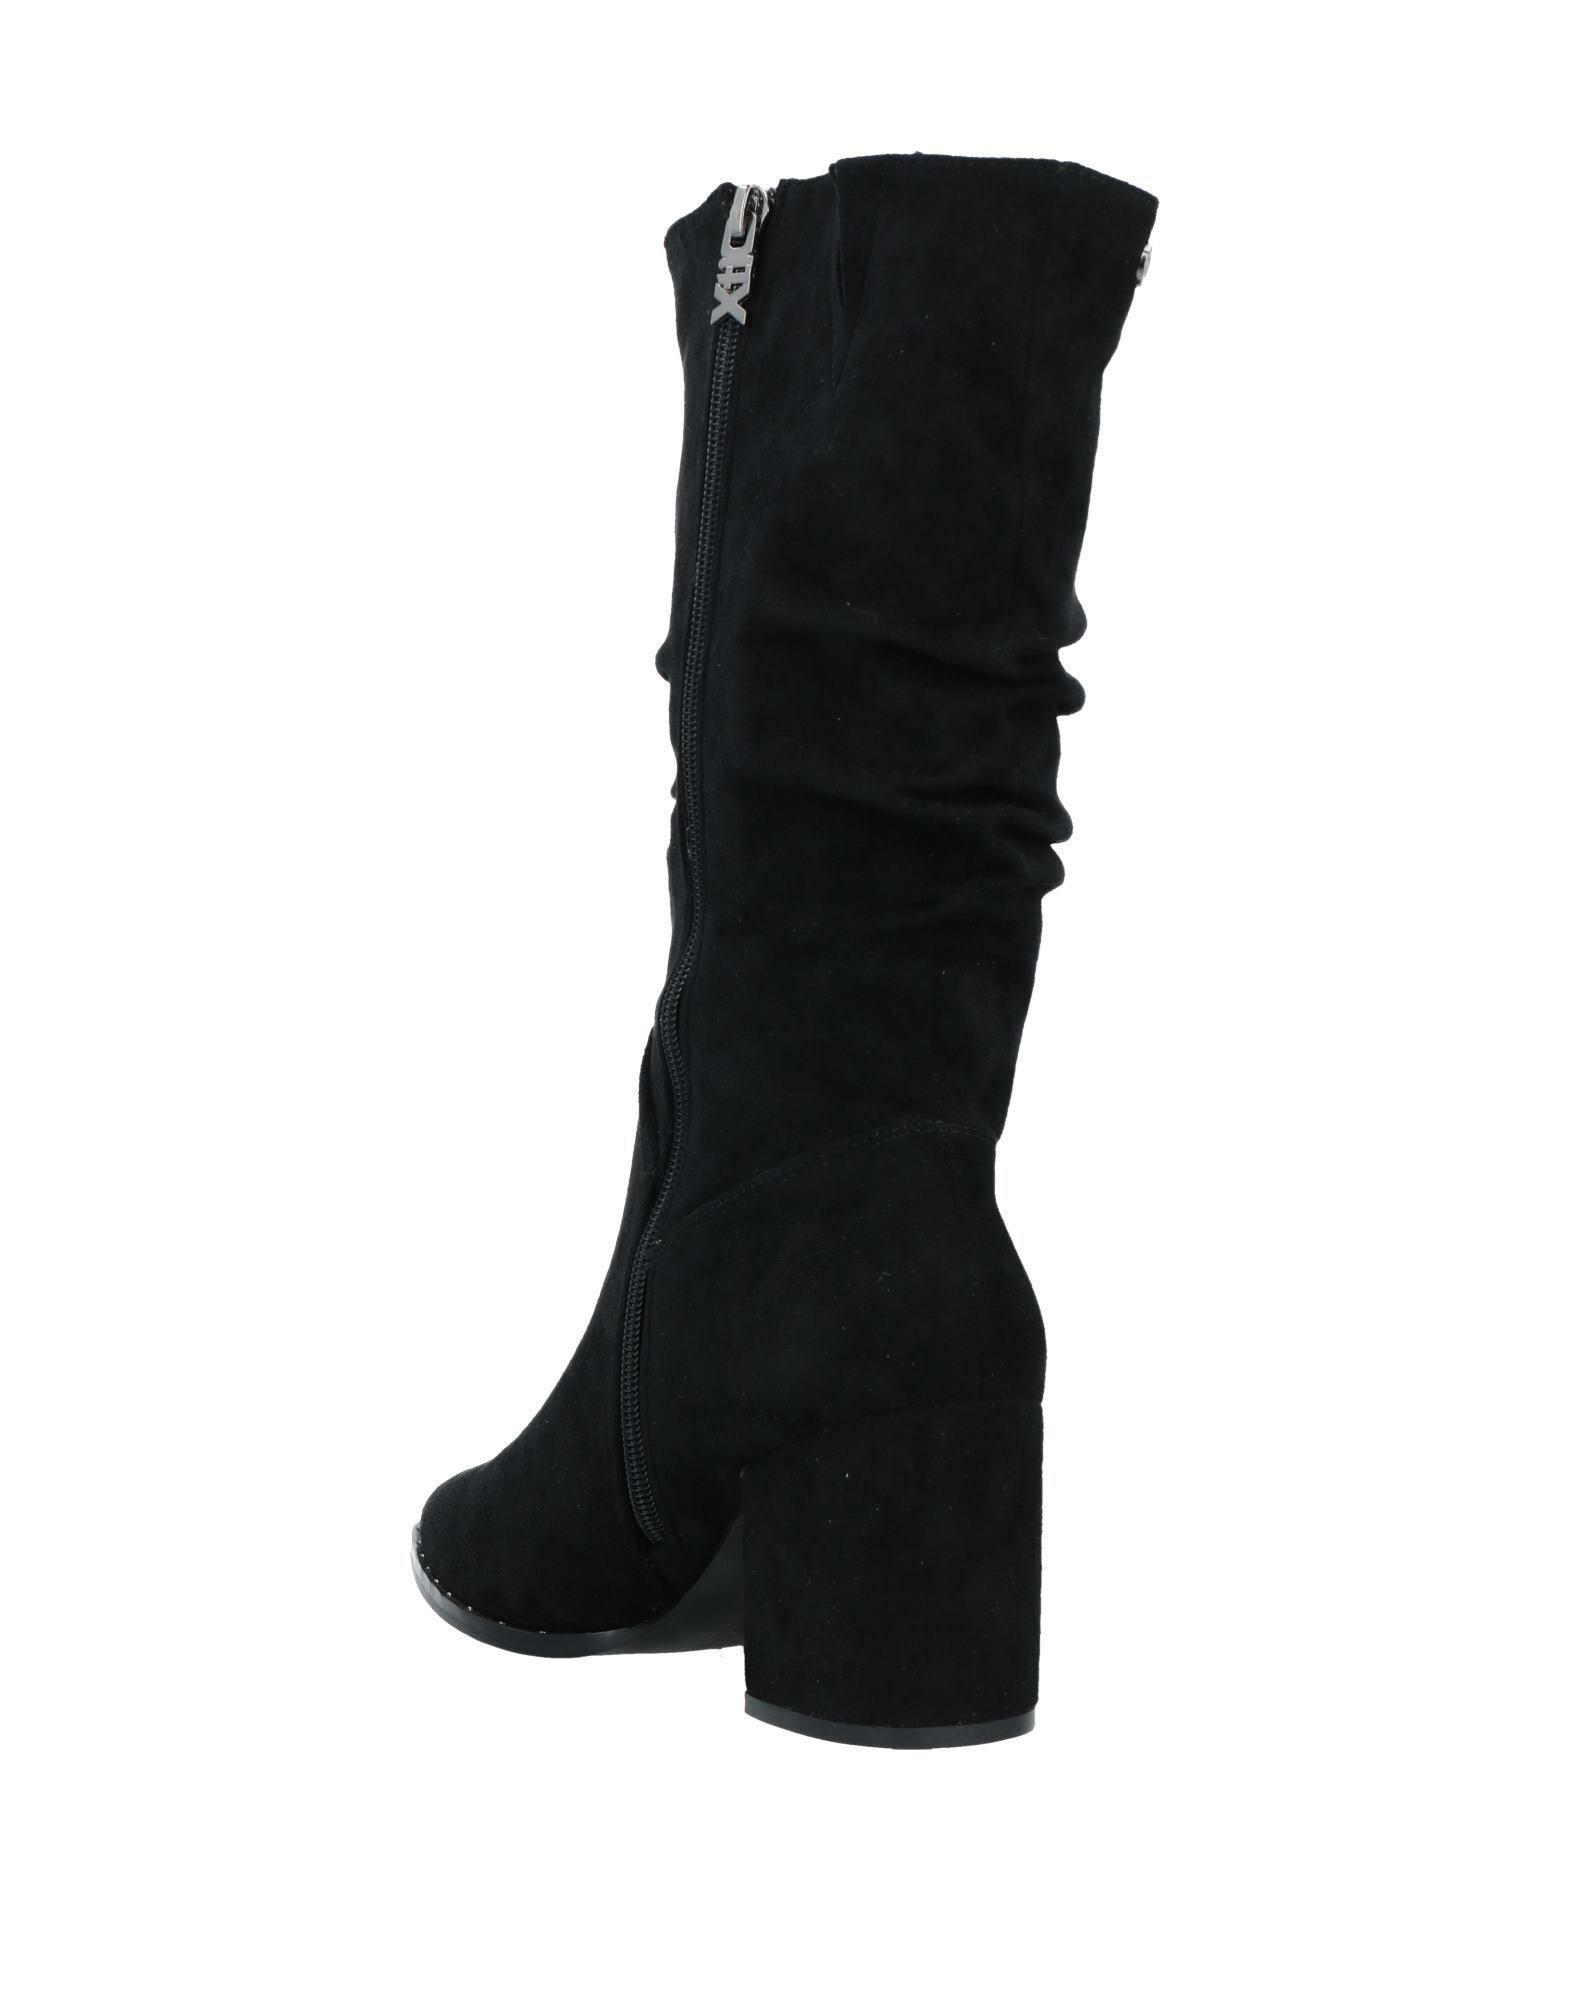 New Womens XTI Black 73059 Synthetic Boots Knee-High Elasticated Zip 